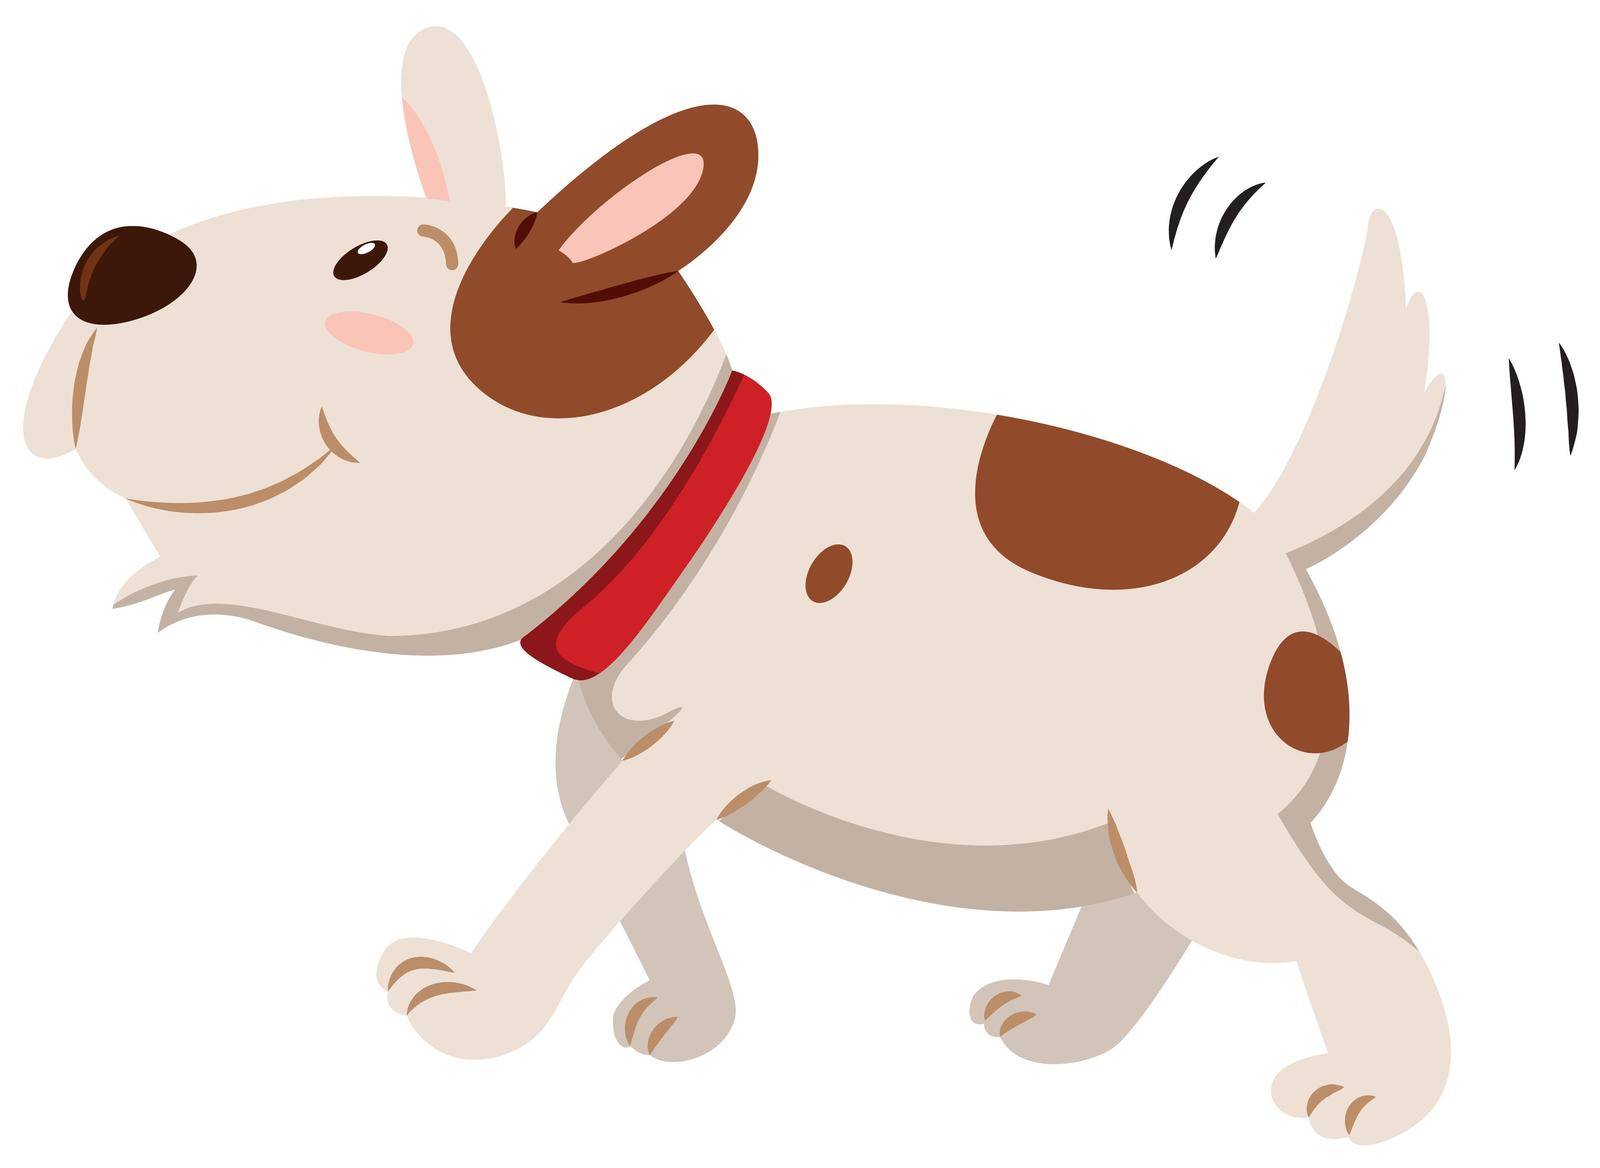 Little dog wagging its tail illustration